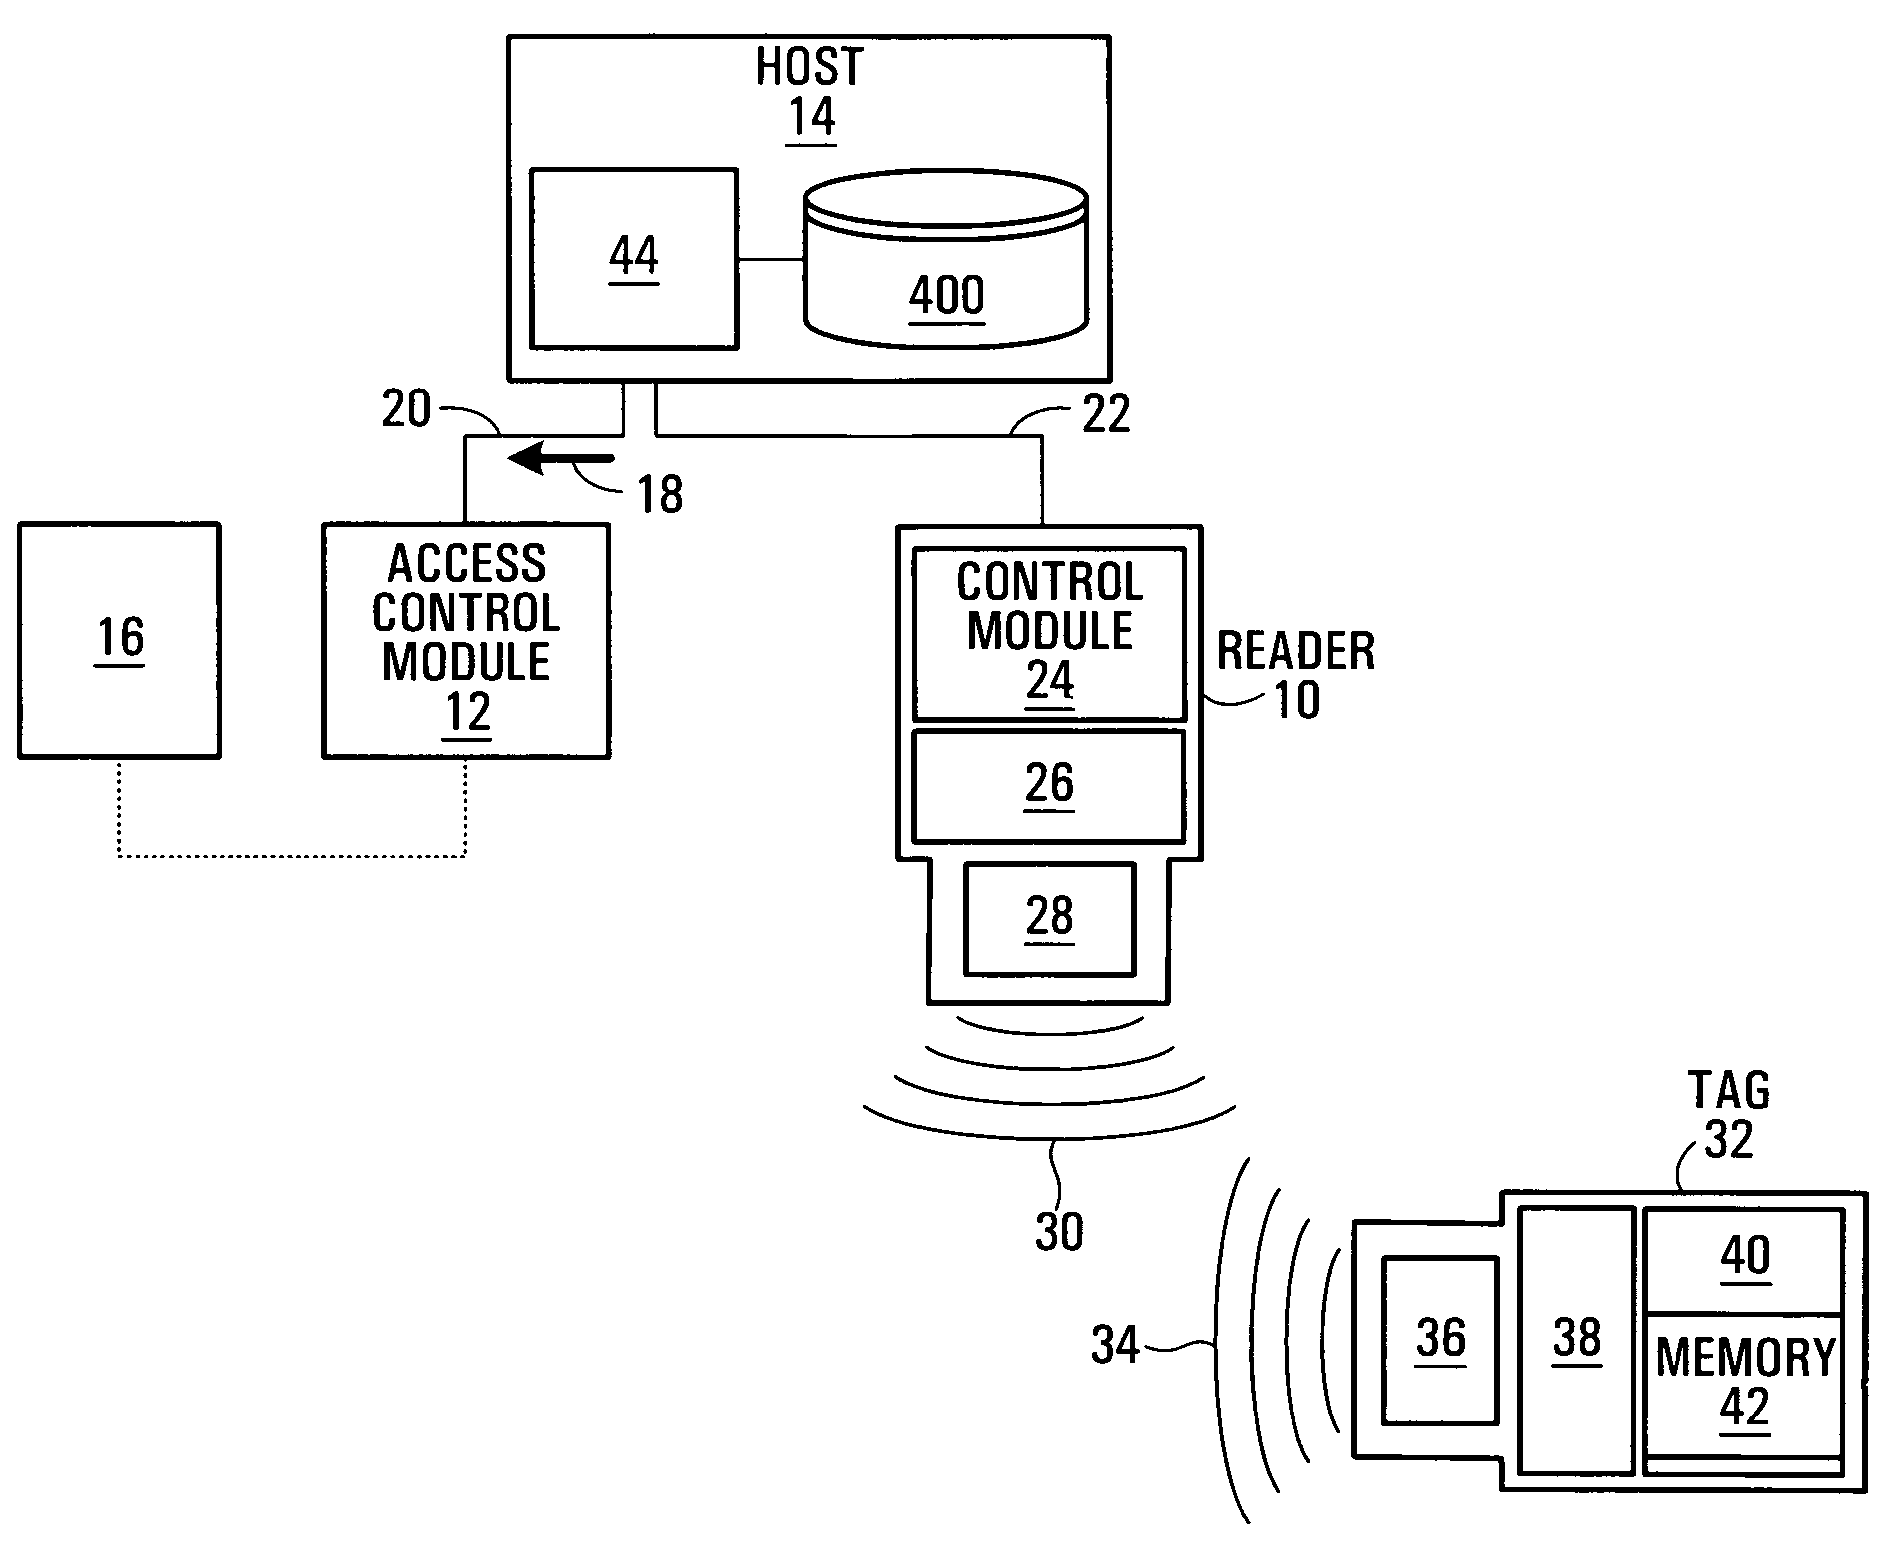 User authentication for contact-less systems